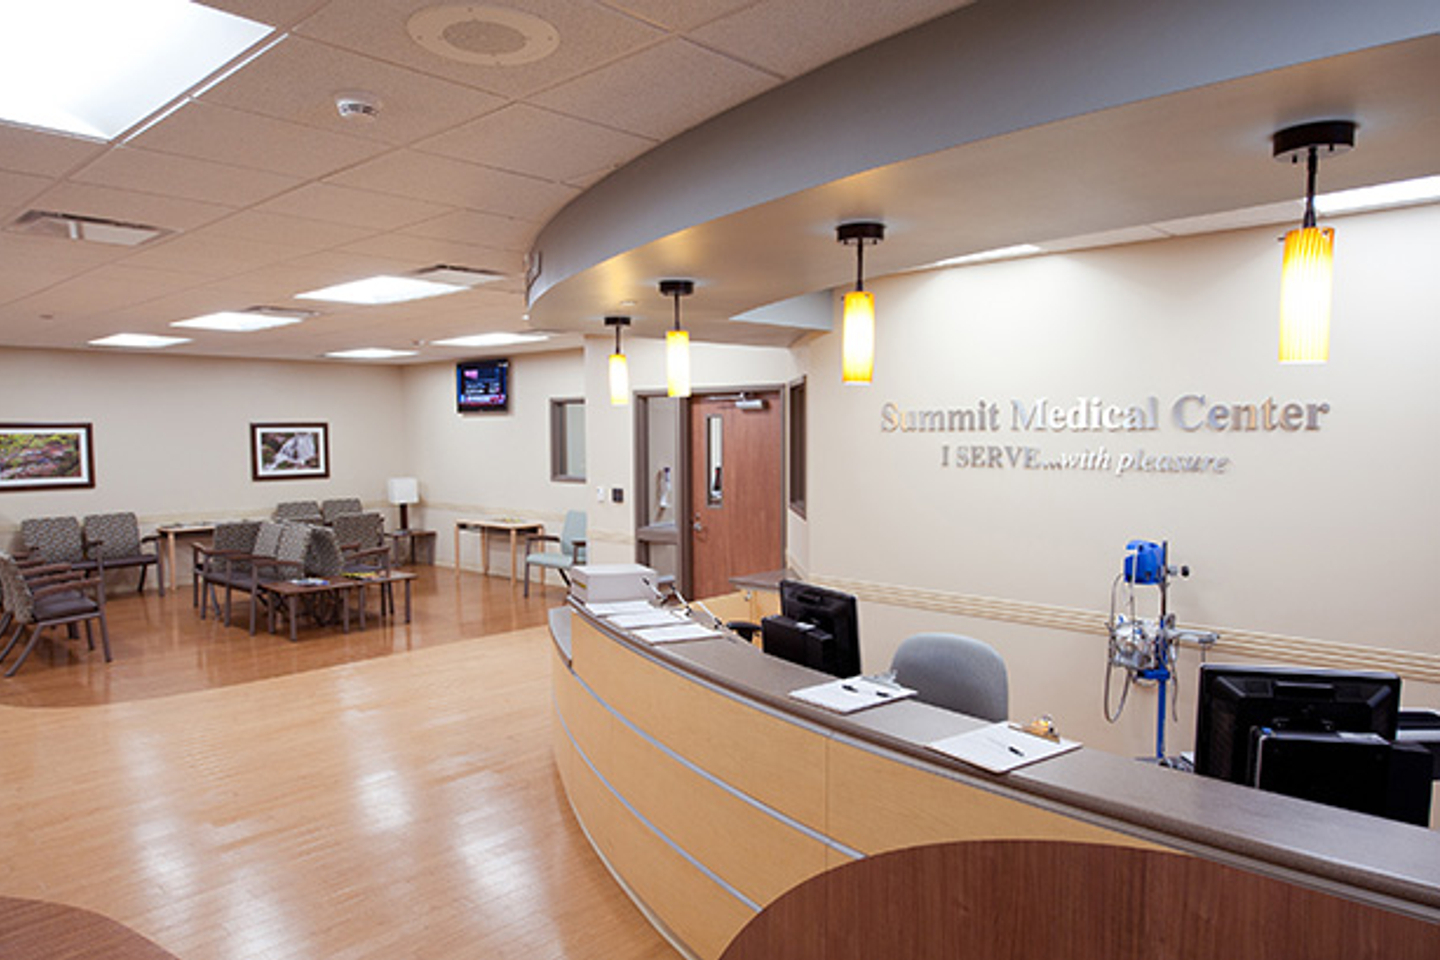 The waiting room at Tristar Summit Medical Center is seen with several grey chairs in the background and a reception desk area to the right. 